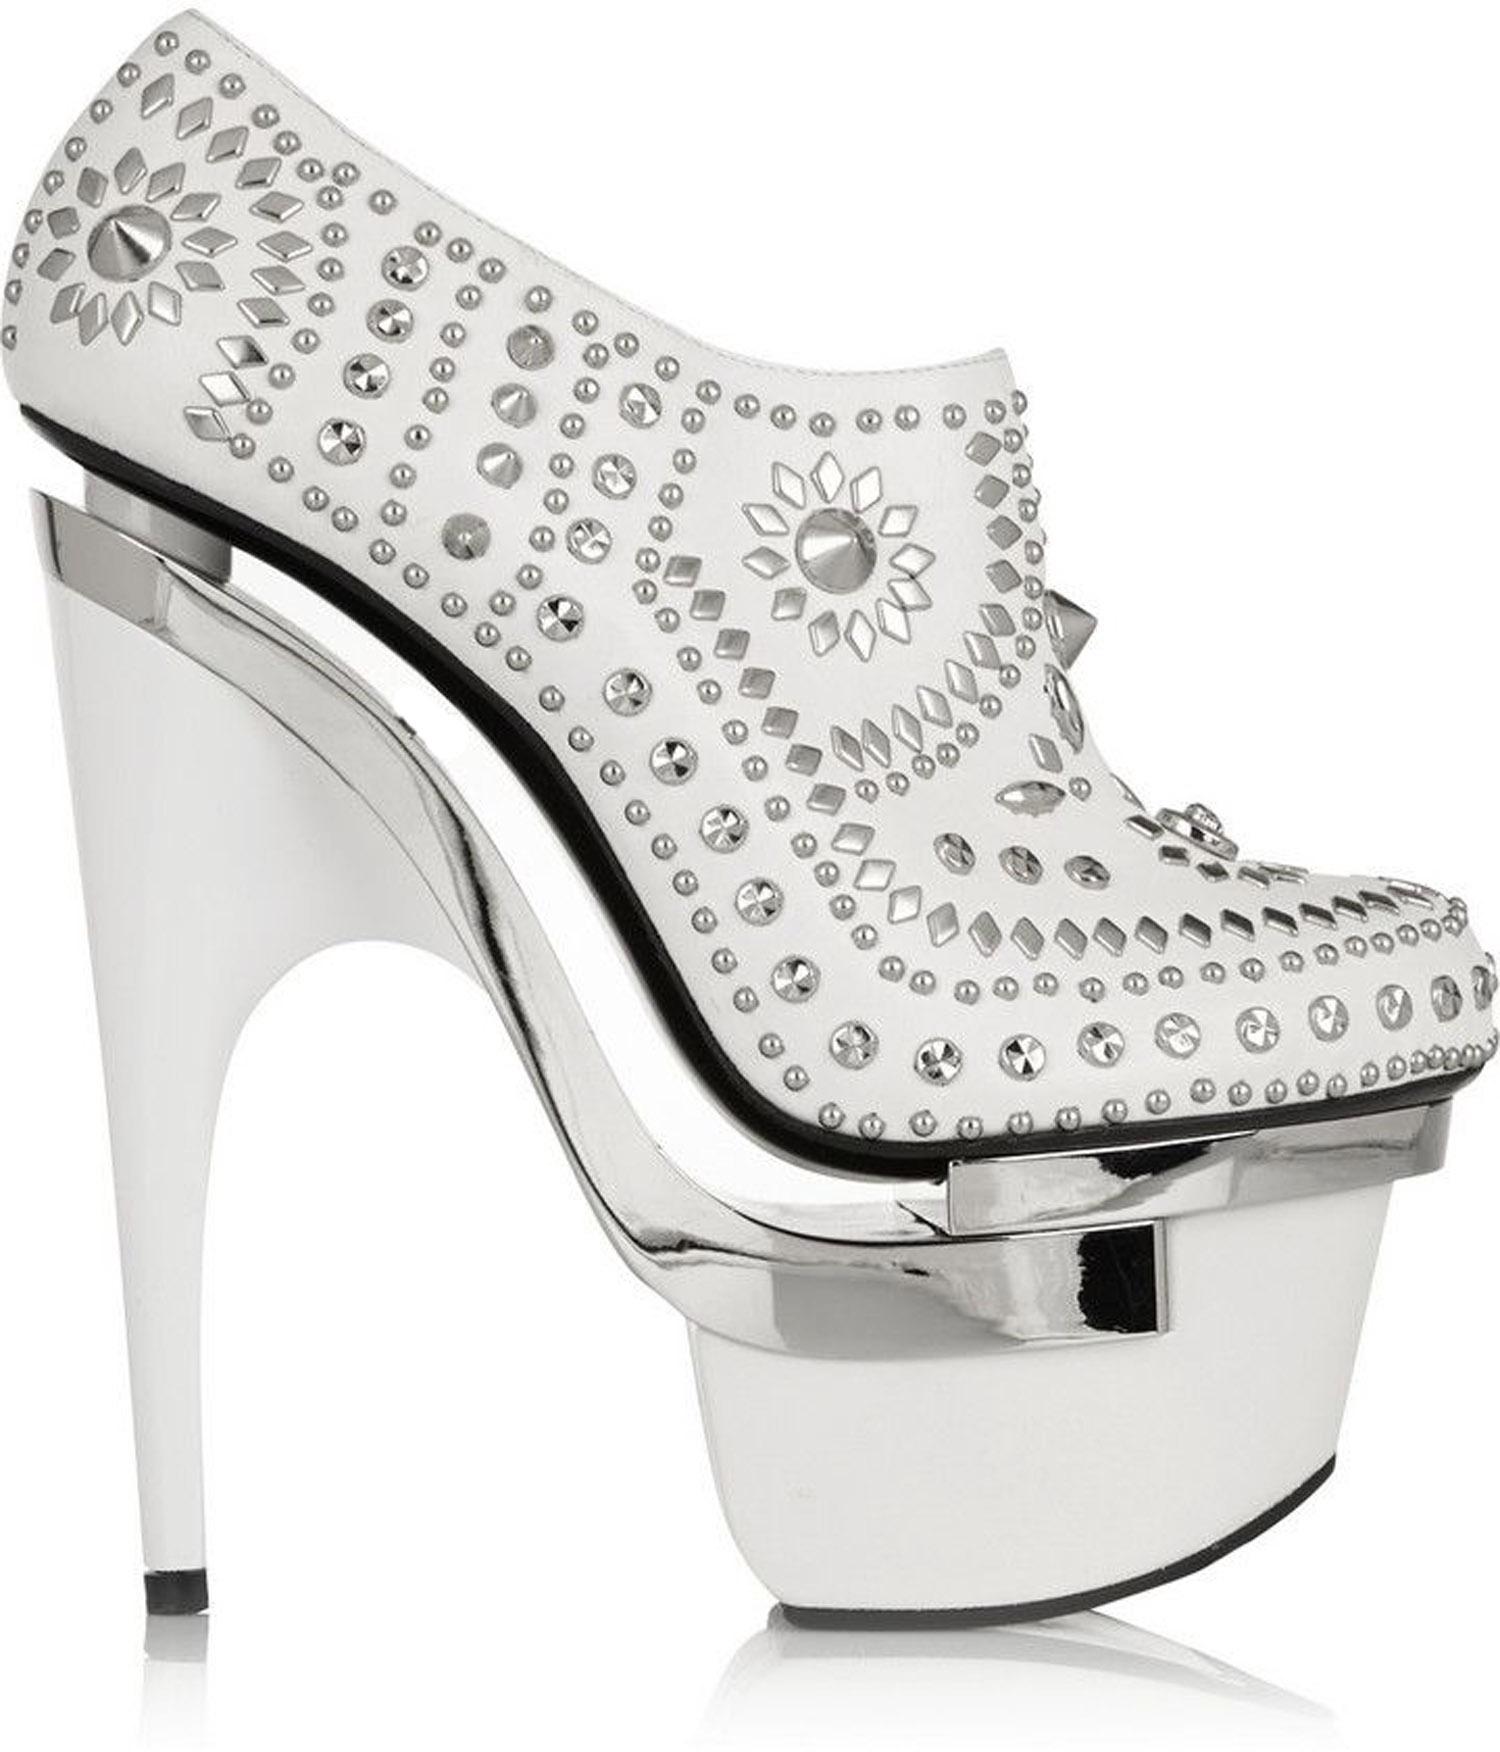 New Versace Leather Studded Platform Ankle Boots Booties
Designer sizes available 37 and 40 - US 7 and 10
White Color, Silver Tone Metal Studs, Triple Platform, Side Zip. 
Heel Height - 6.5 and 7 inches, Platform - 2.5 inches.
Made in Italy.
Retail